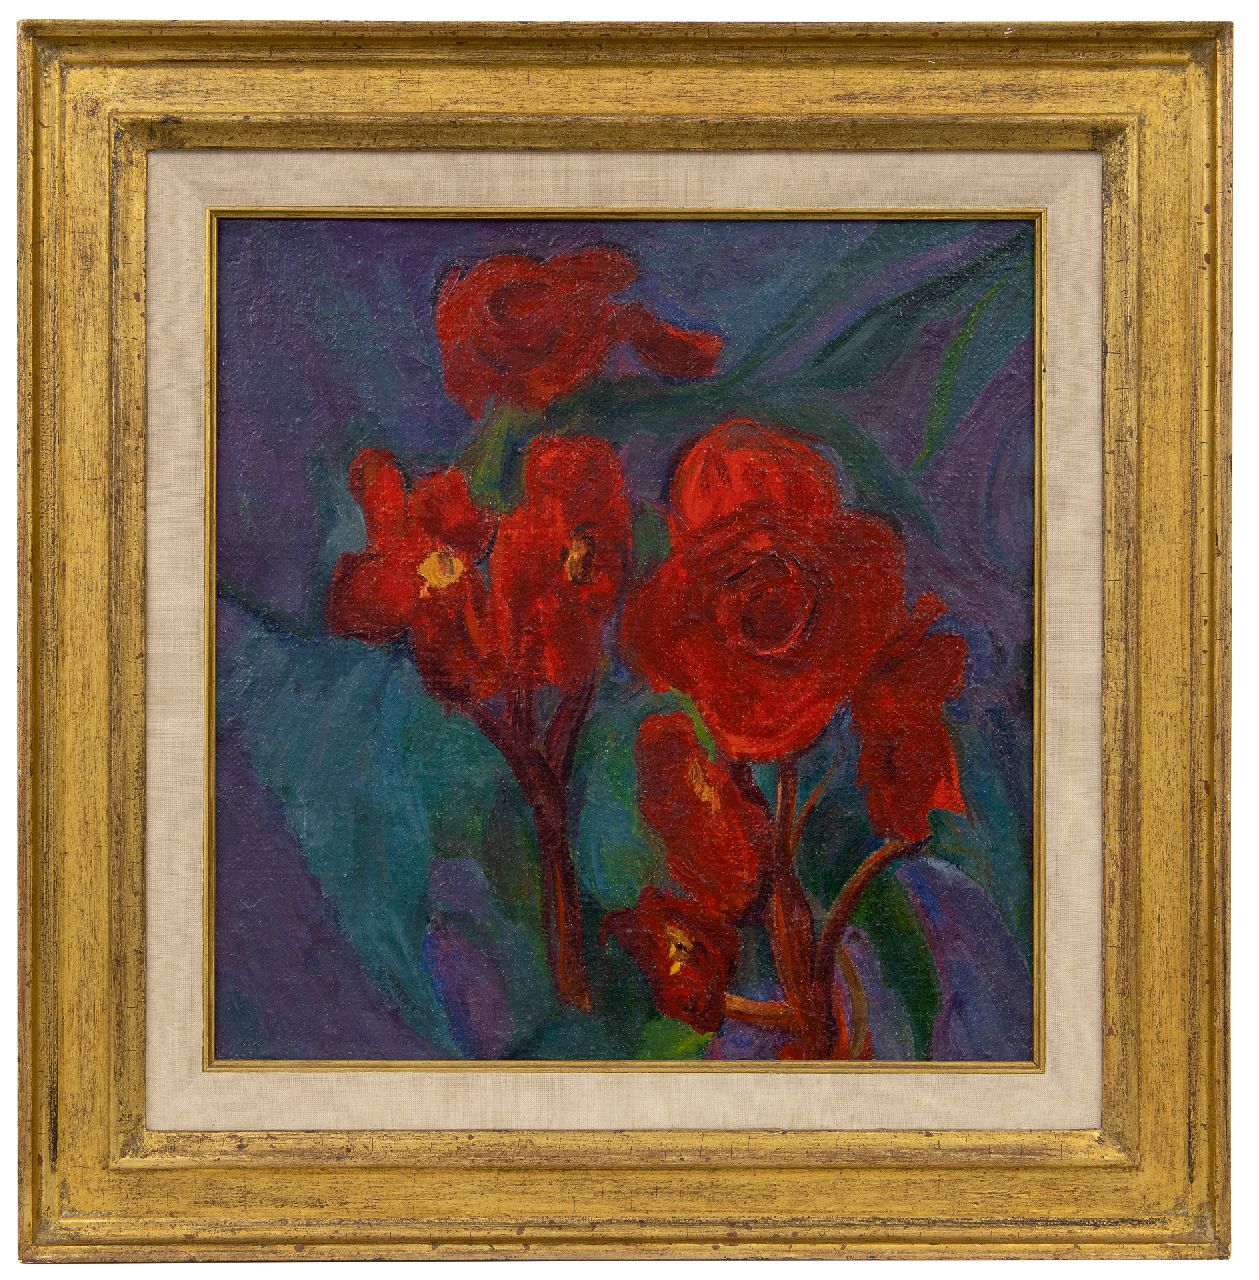 Dijkstra J.  | Johannes 'Johan' Dijkstra | Paintings offered for sale | Red flowers, oil on canvas 36.0 x 35.8 cm, signed on the stretcher